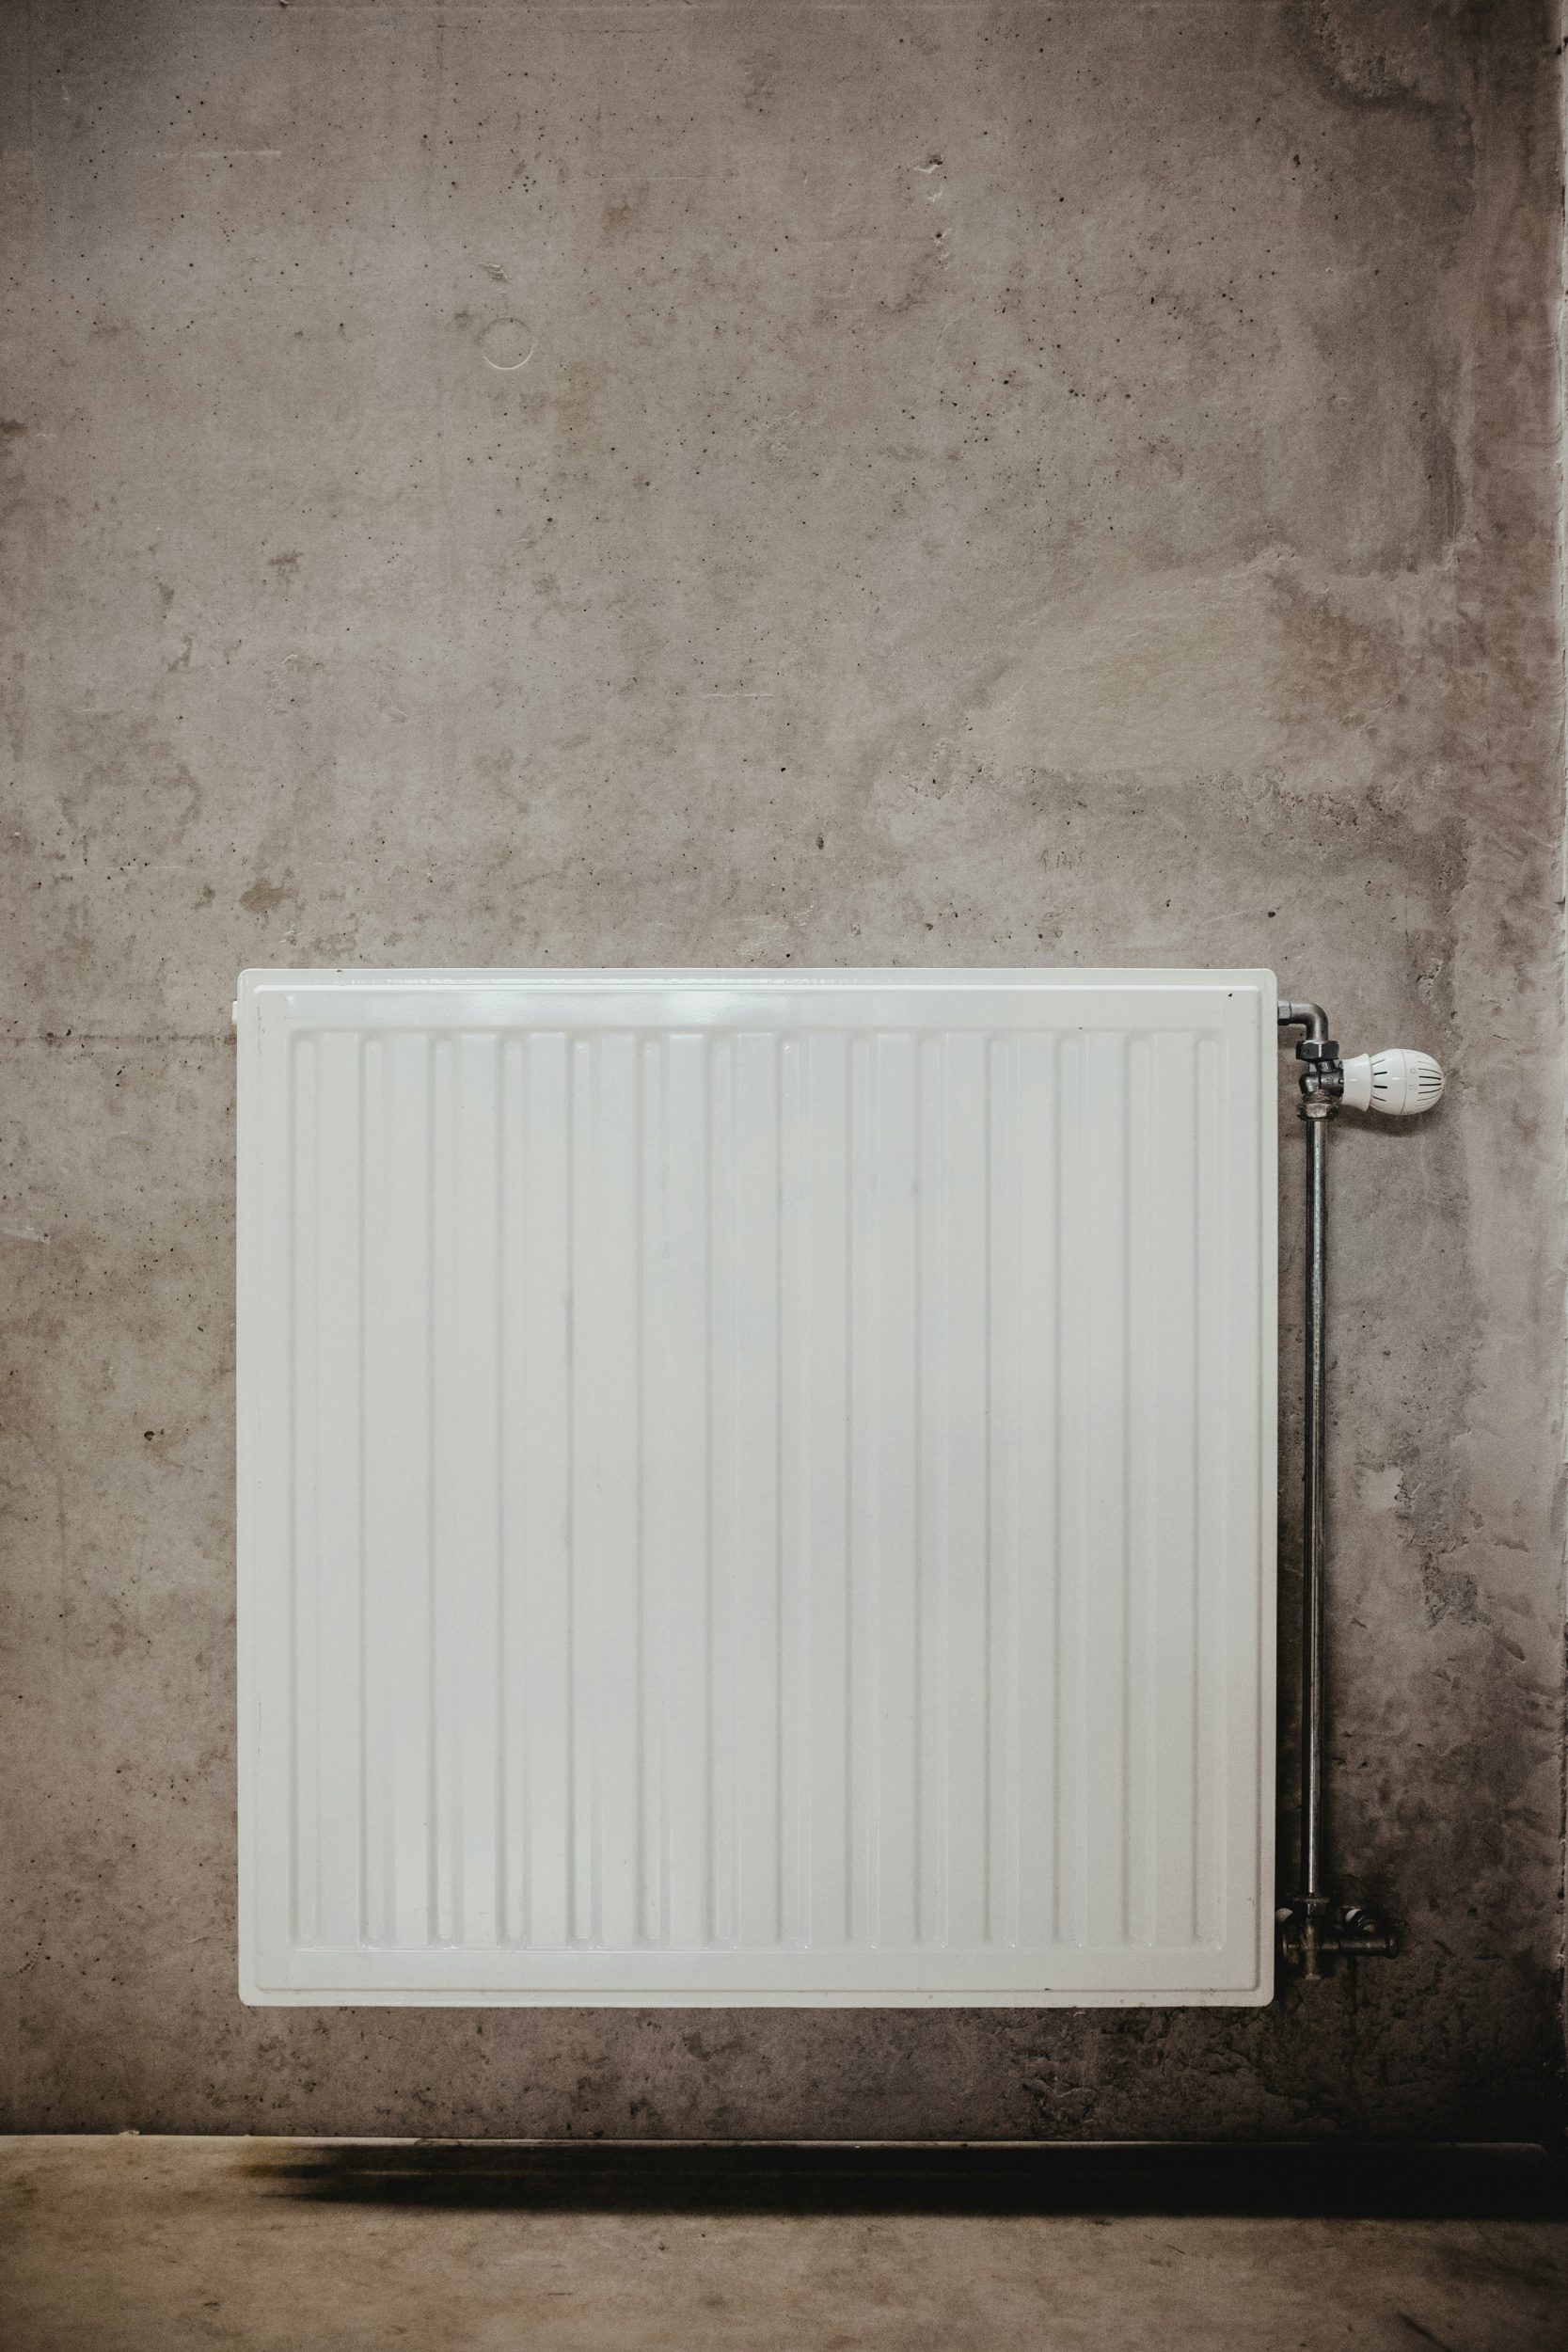 Radiator against the wall.